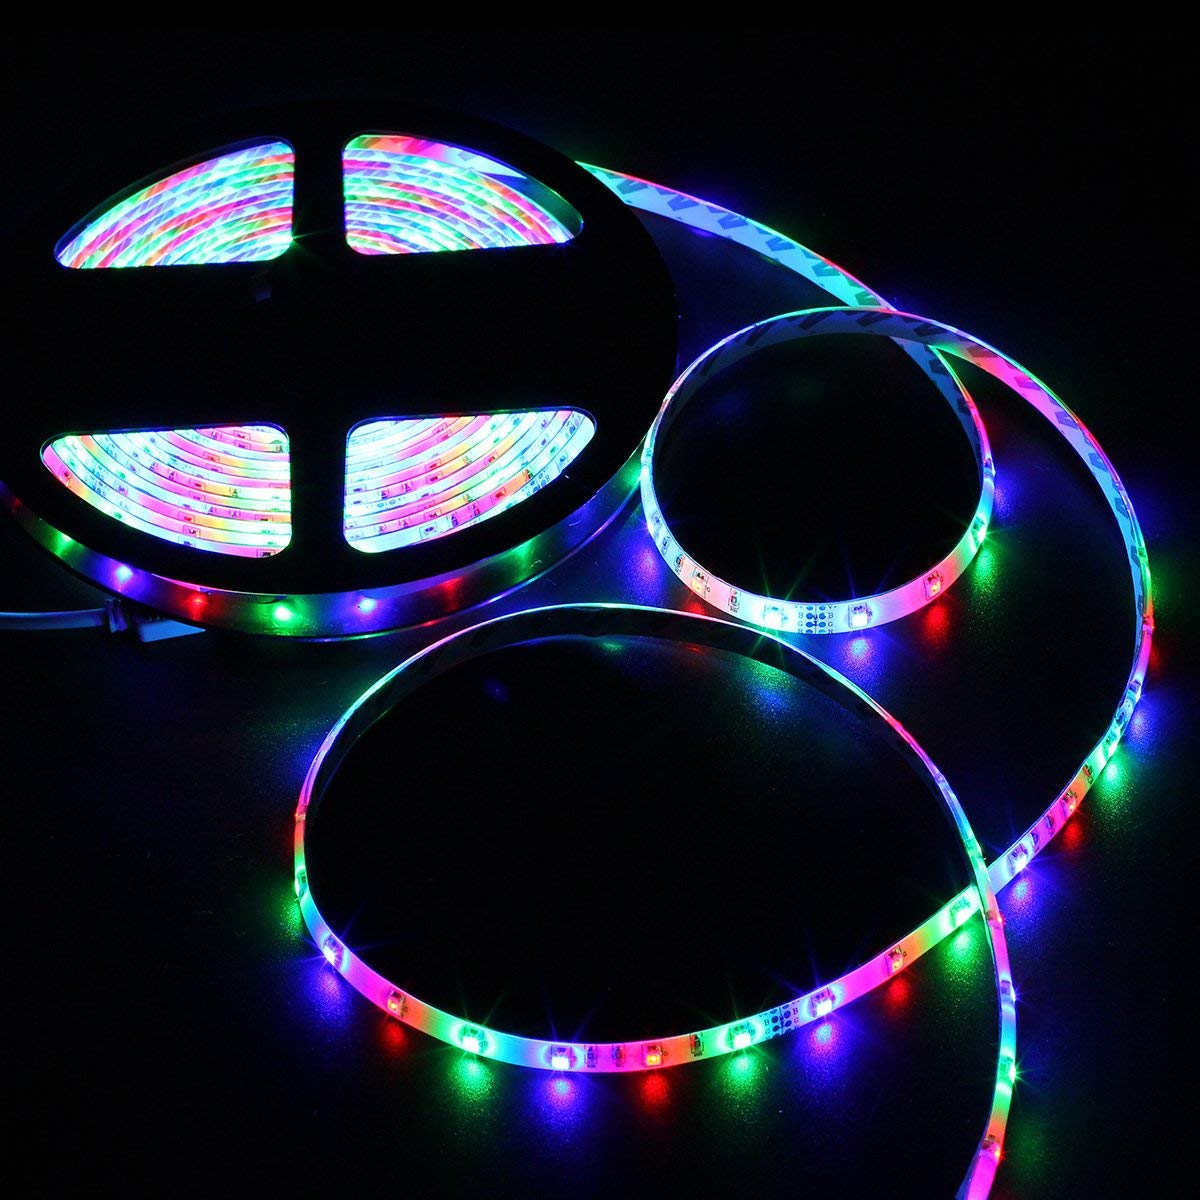 SUPERNIGHT LED Strip Lights Kit Waterproof ¨C TWO 16.4ft 600 LEDs SMD 3528 RGB Light with 44 Key Remote Controller, Extra Adhesive Tape, Flexible Changing Multi-Color Lighting Strips for TV, Room